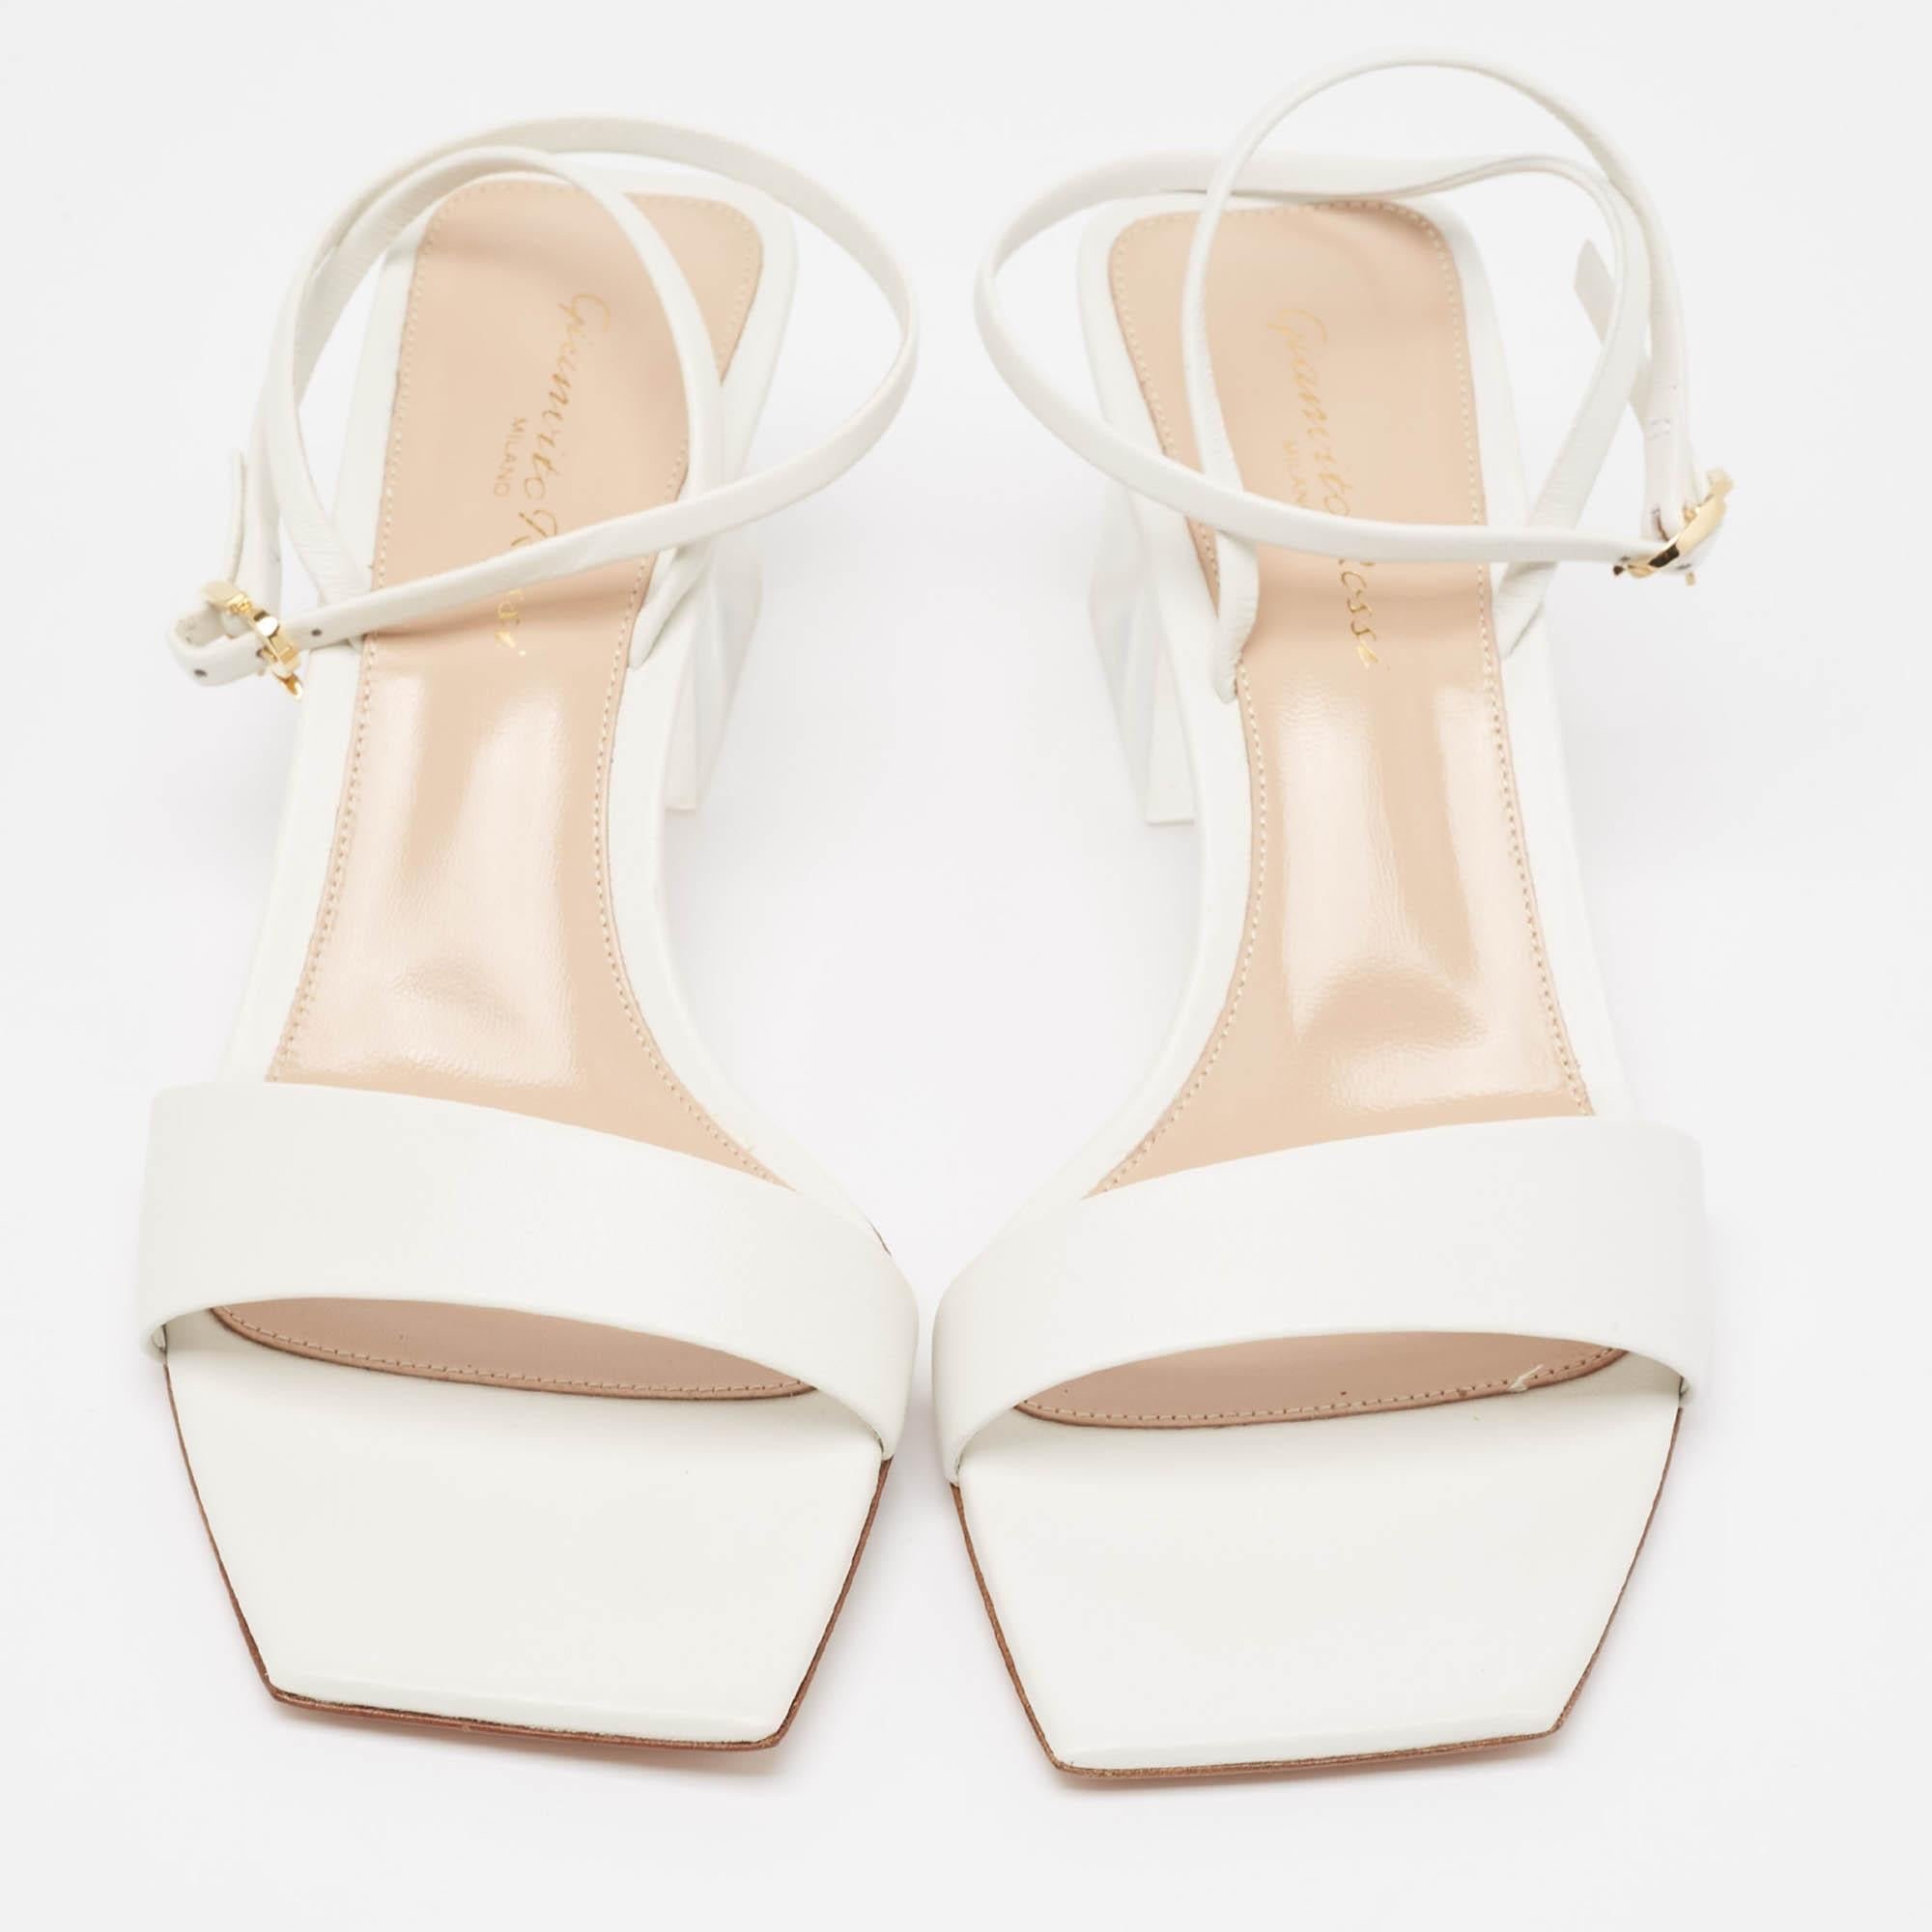 Gianvito Rossi White Leather Cosmic Sandals Size 39.5 For Sale 1